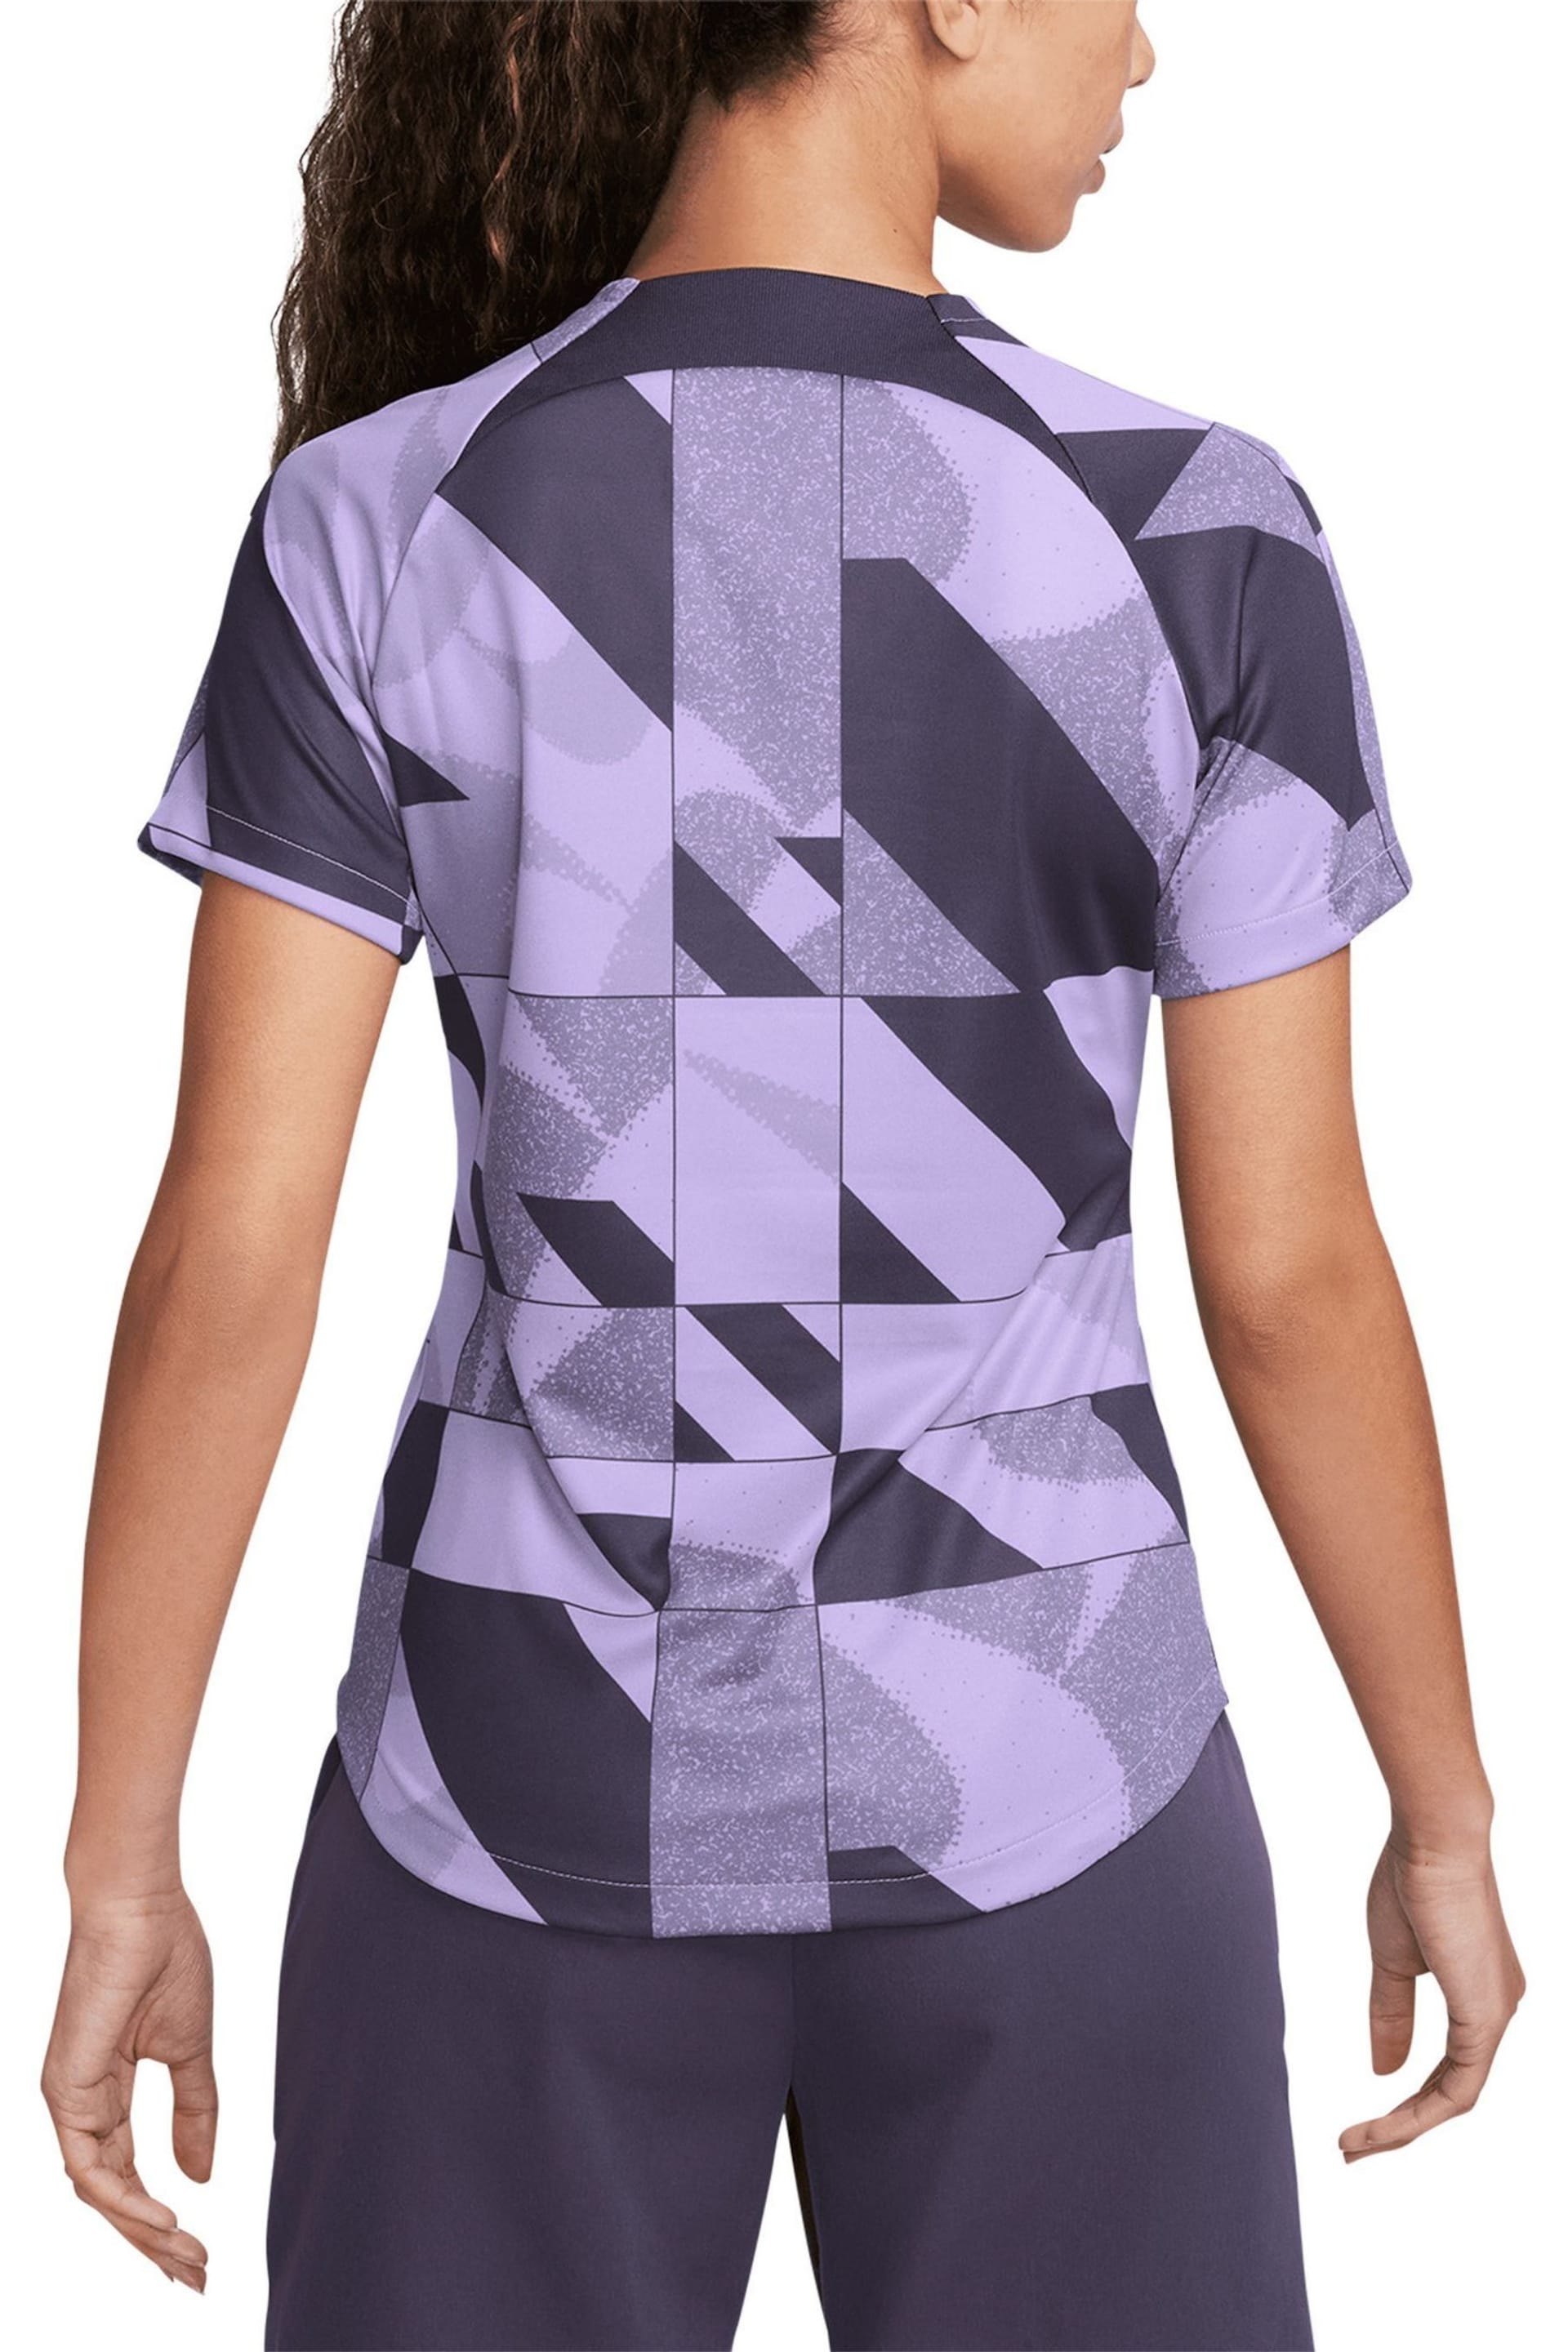 Nike Purple Liverpool Academy Pro Pre Match Top Womens - Image 2 of 4